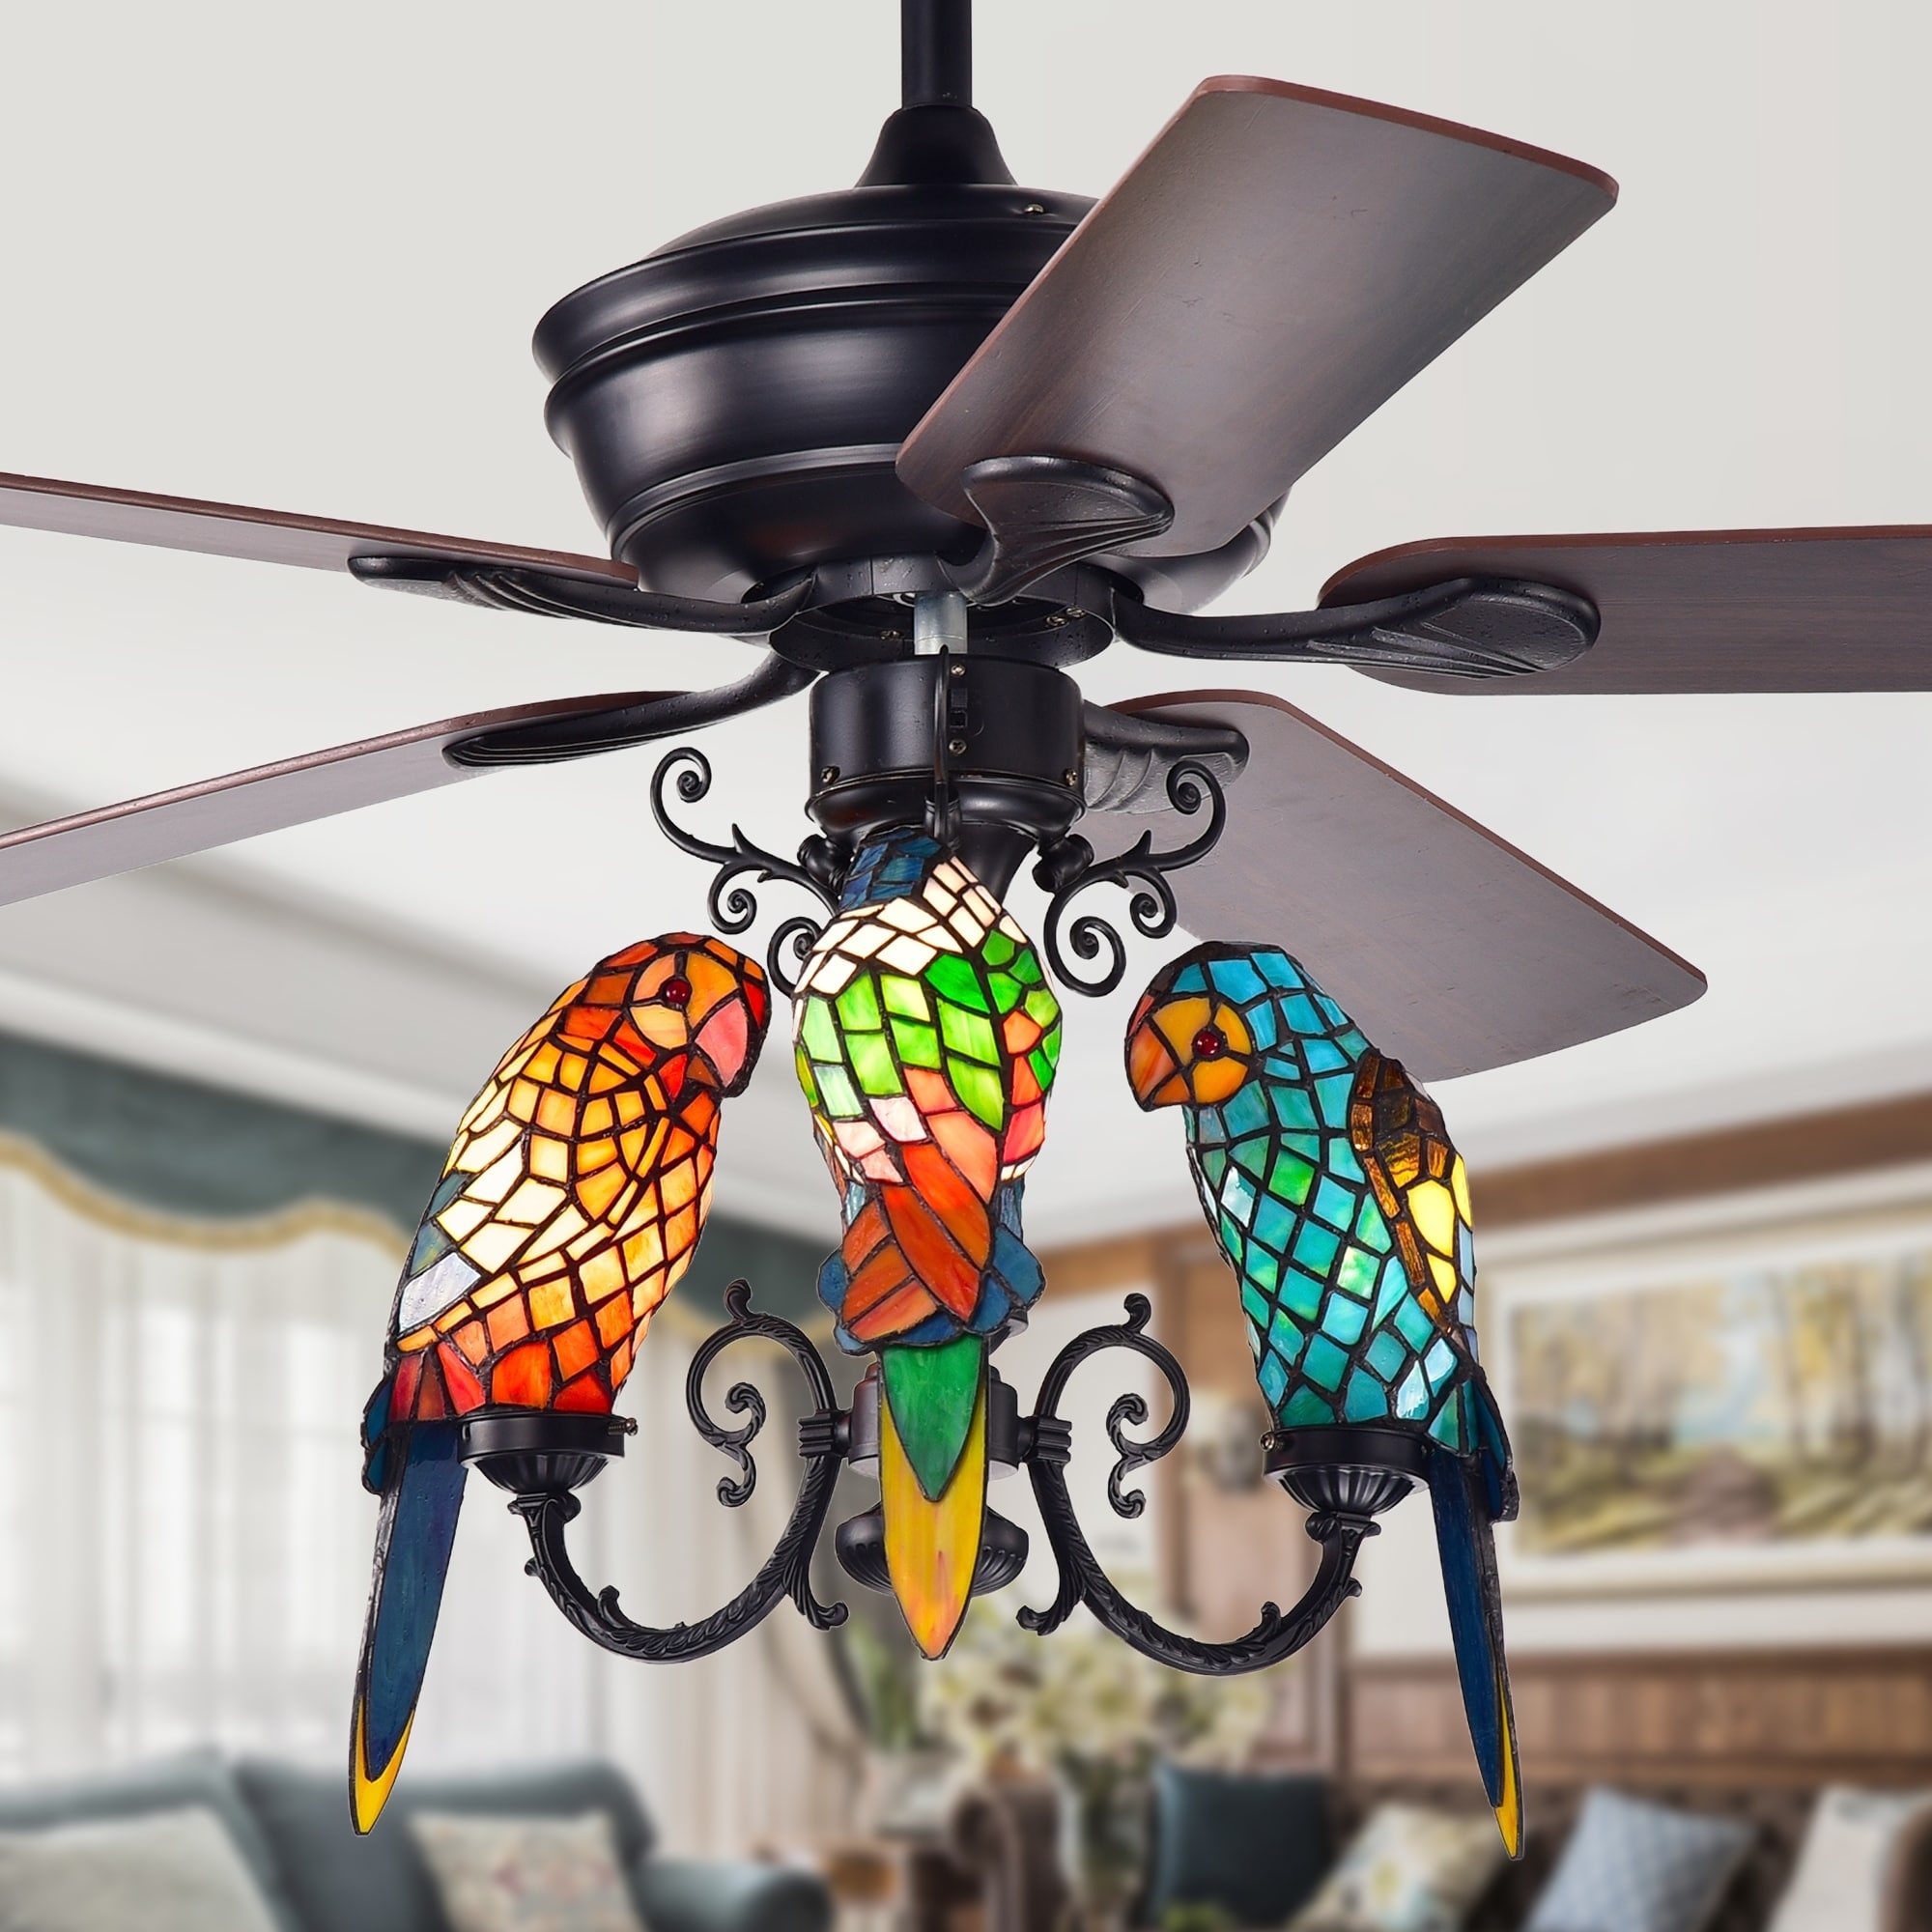 Korubo 3 Light 52 Inch Lighted Ceiling Fan Tiffany Style Parrot Shades Remote Controlled 2 Color Option Blades